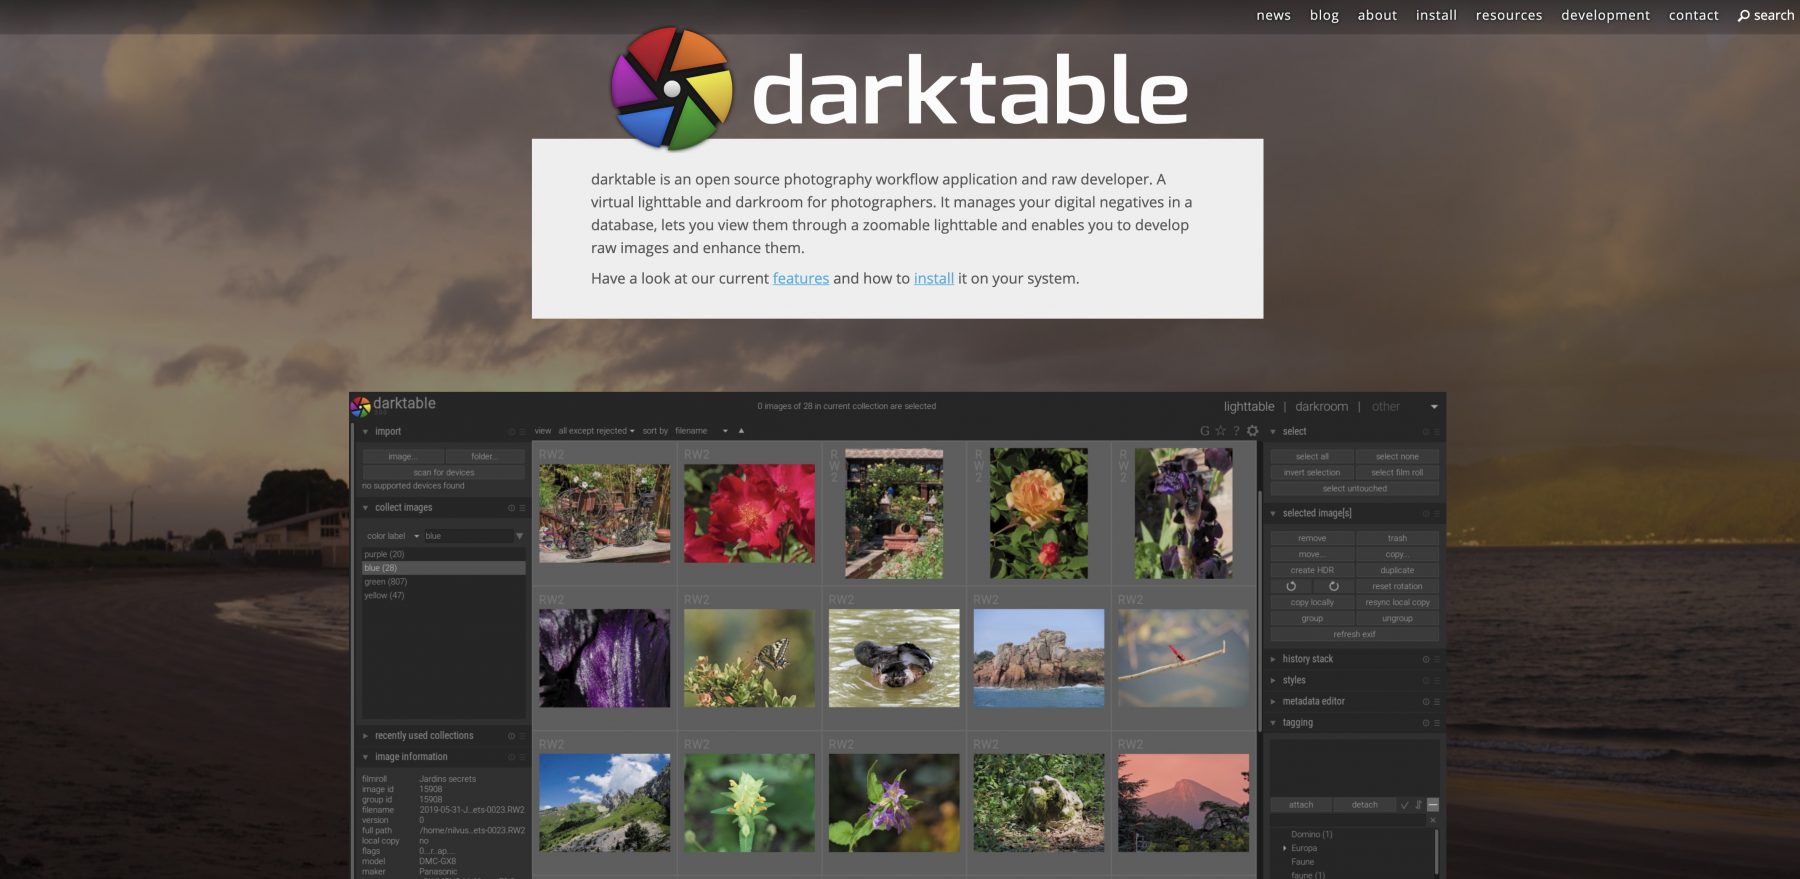 darktable screen with images